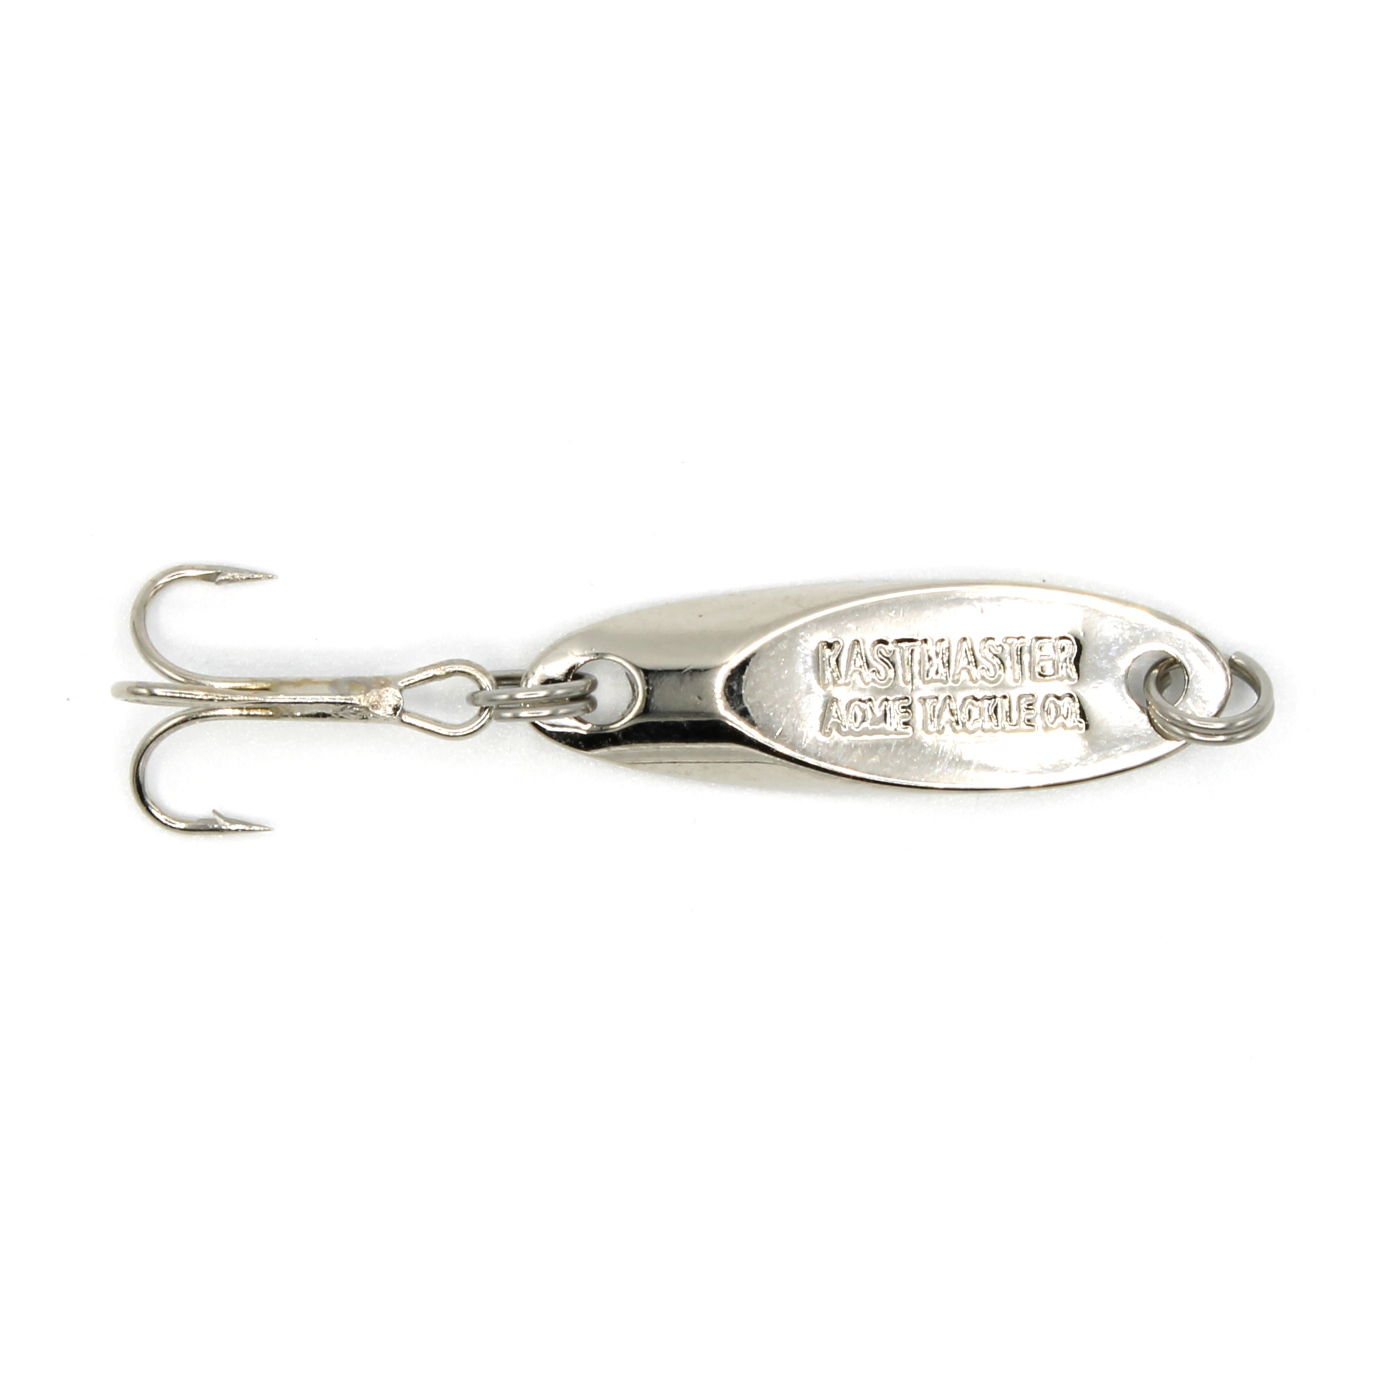 Recommended Knot for Kastmaster Spoons - Fishing Rods, Reels, Line